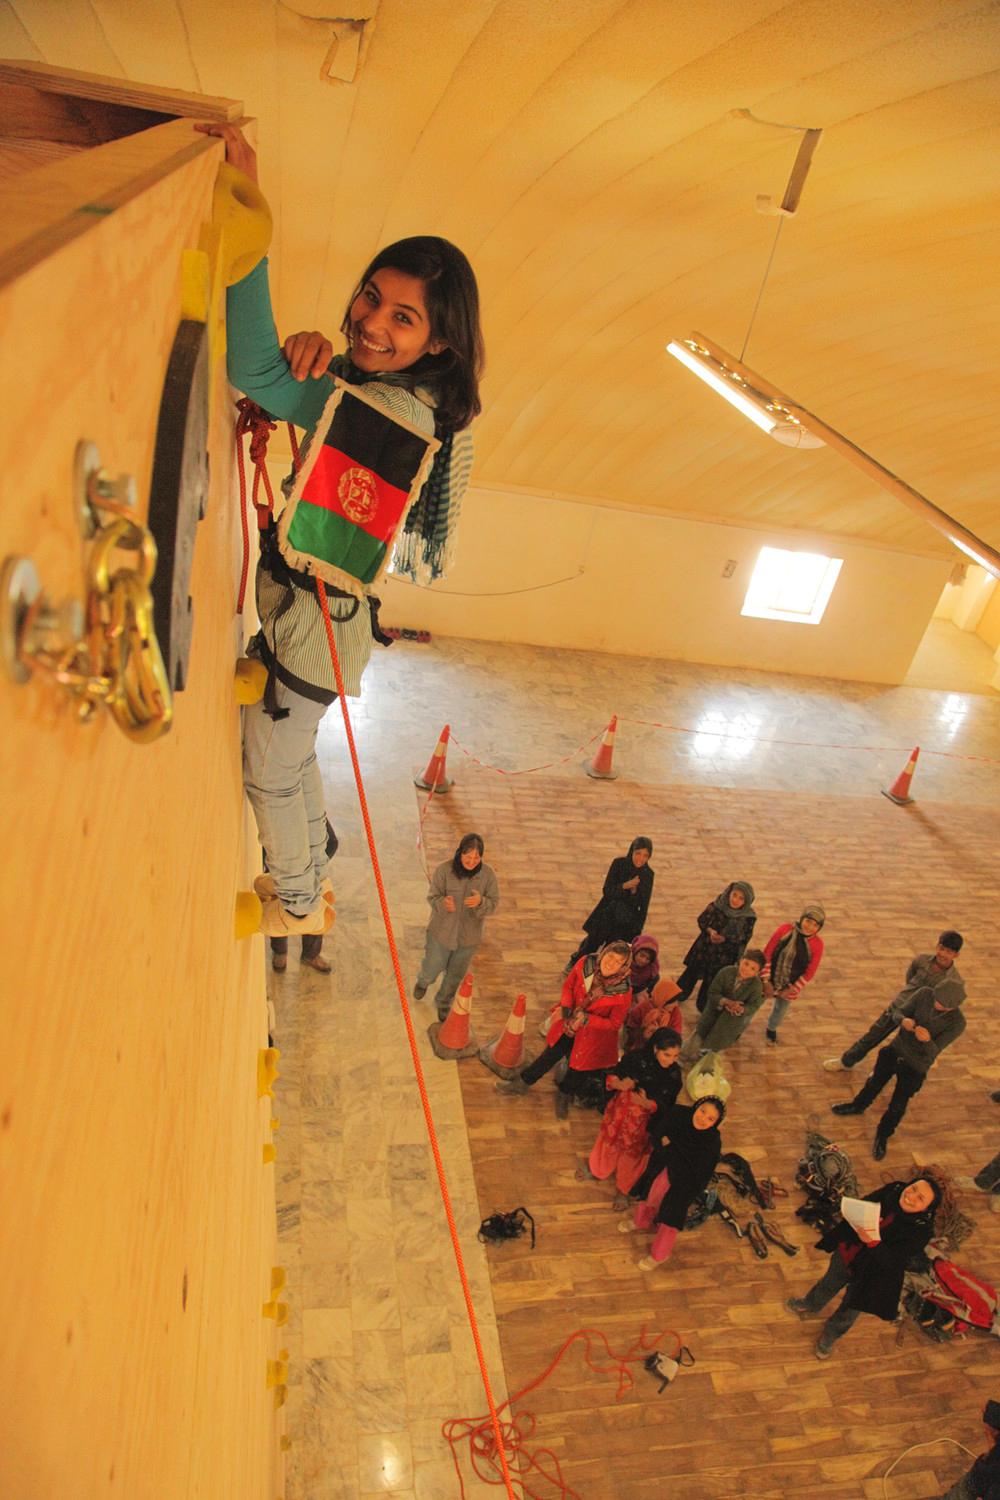 Education Coordinator Benafsha celebrates being the first Afghan woman to climb the 3-faced, 9 metre high climbing wall at Skateistan